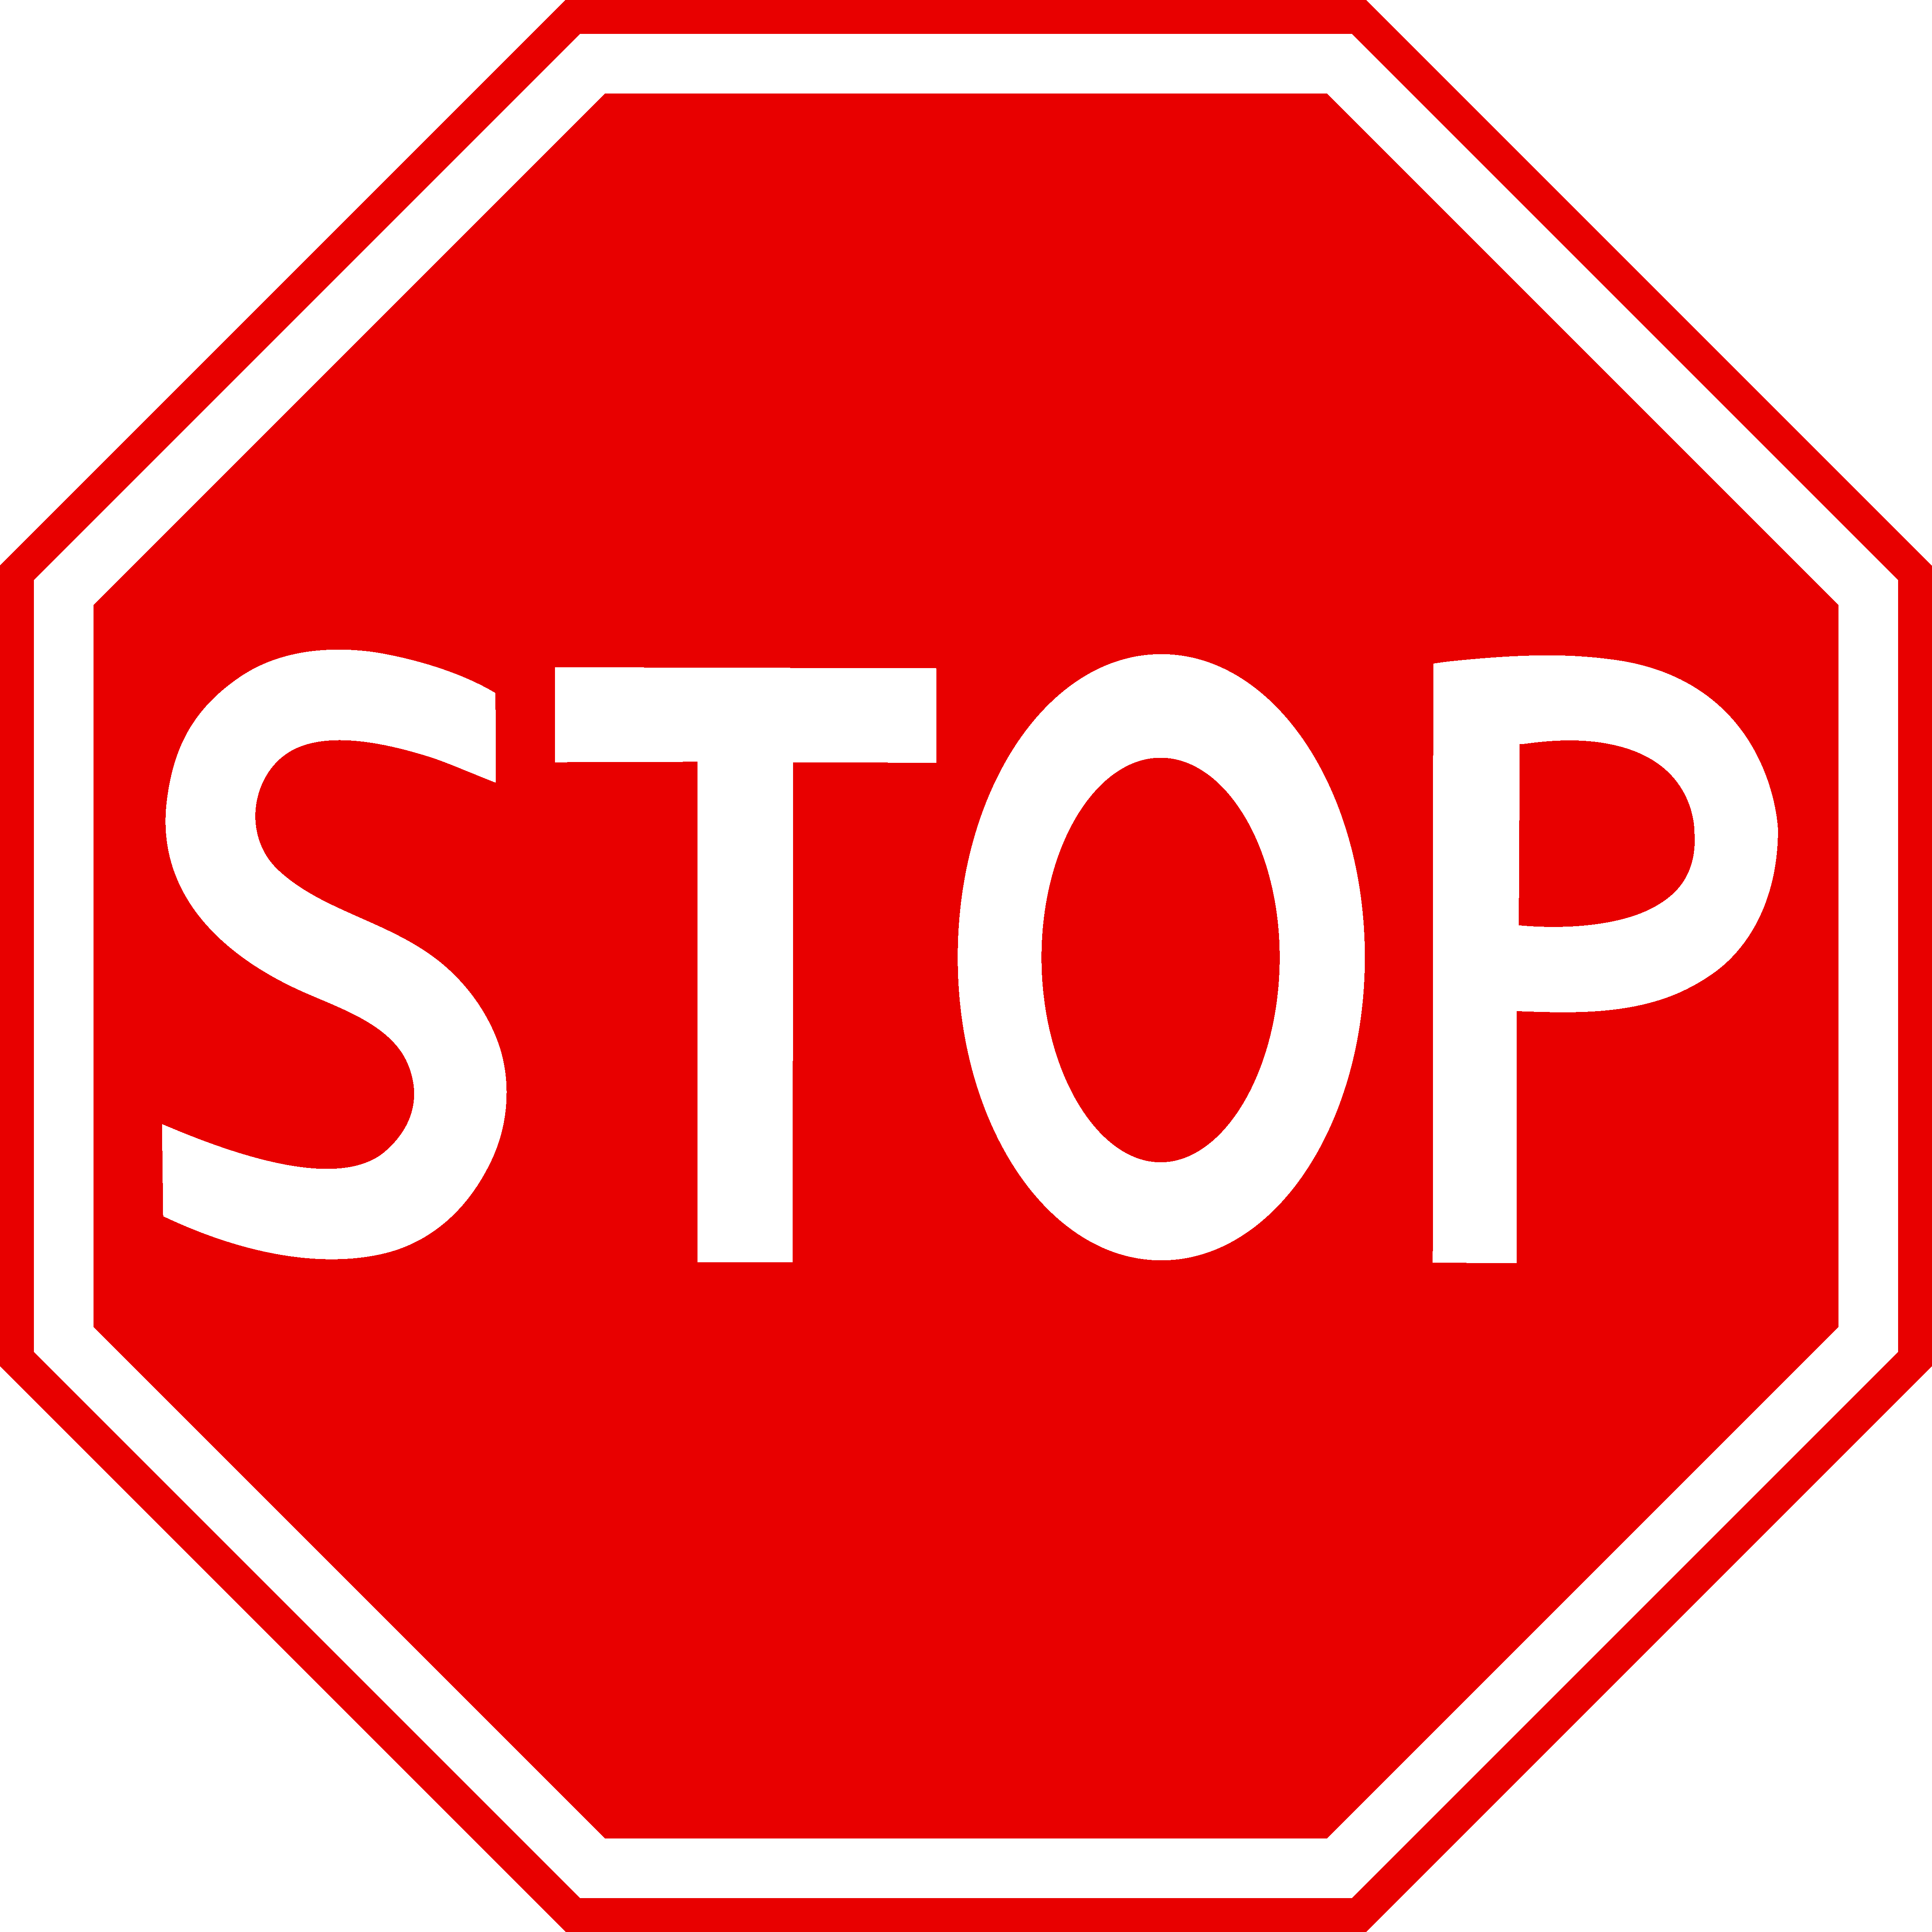 Red stop sign clip art